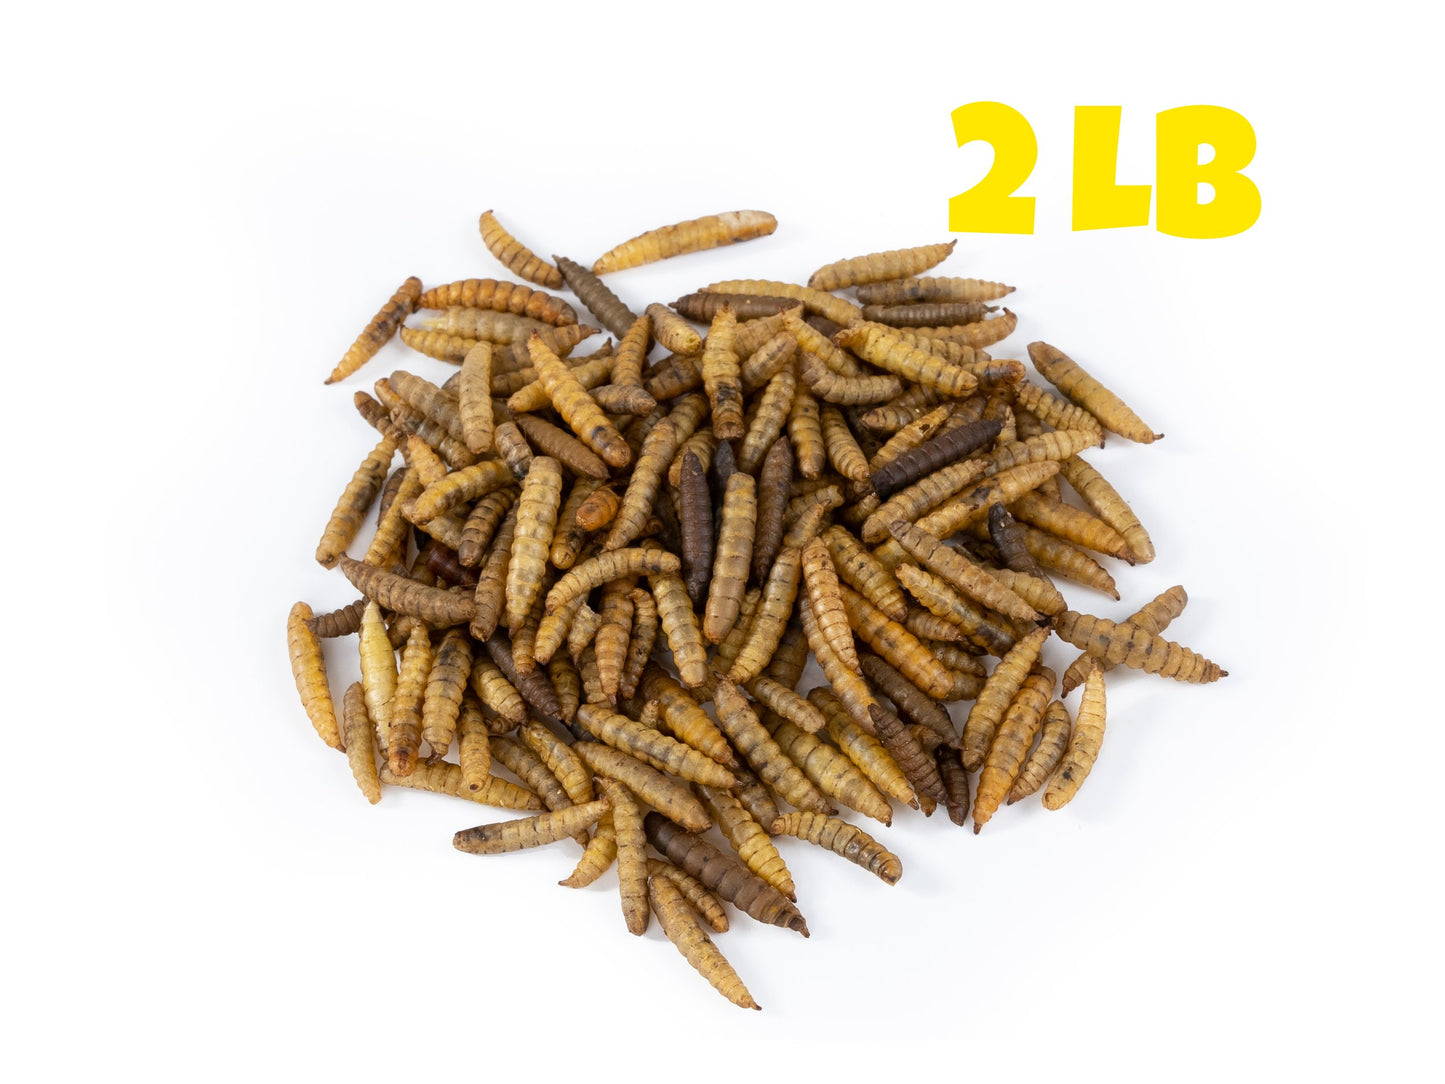 Dried Black Soldier Fly Larvae - 2 LB